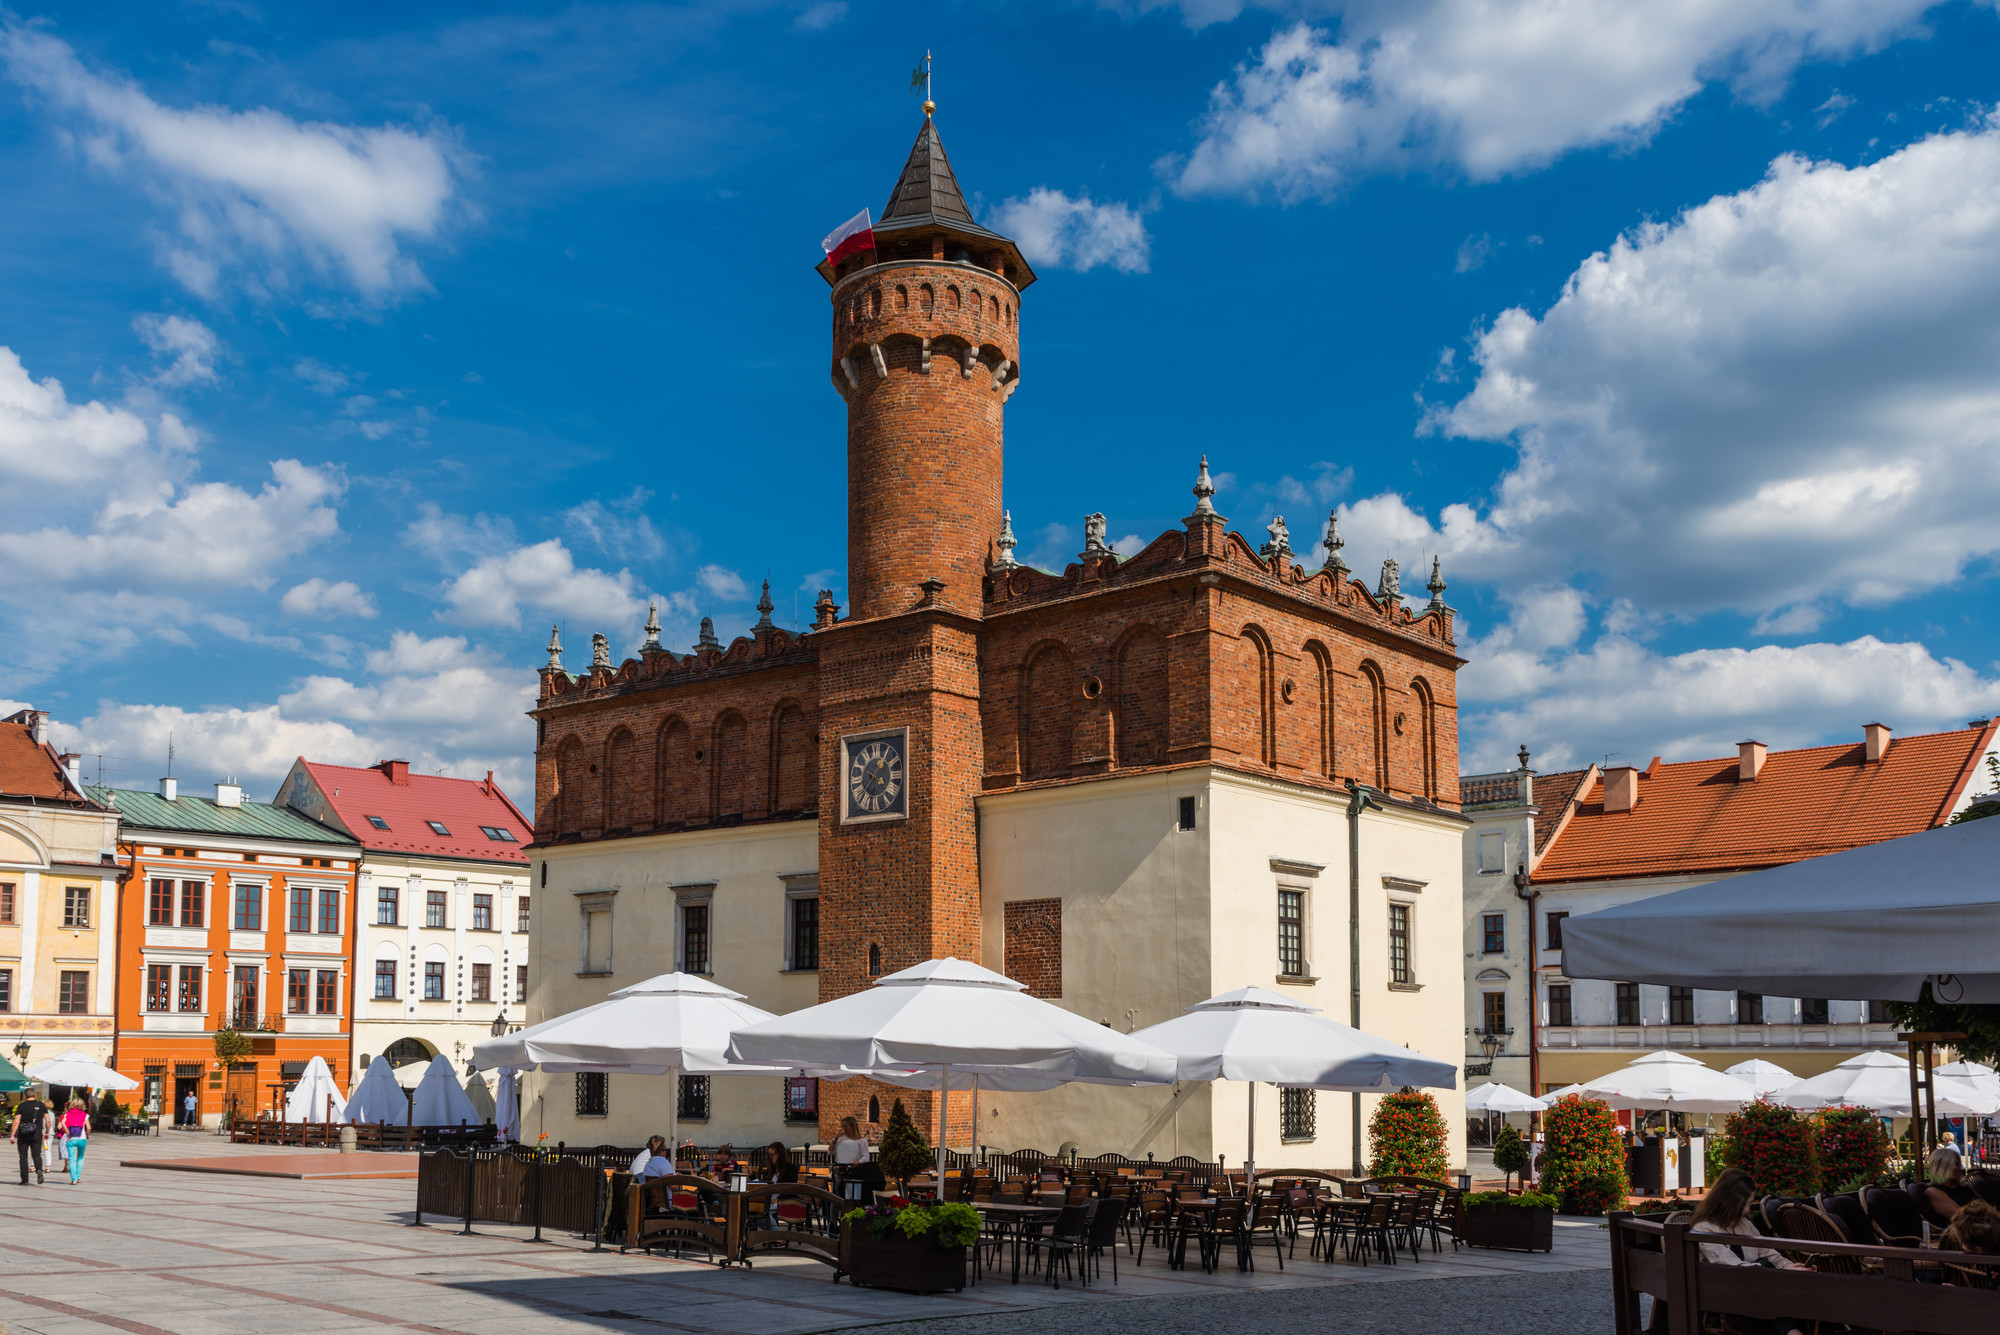  Tarnow Sightseeing Guide What To See Do In Tarn w Poland